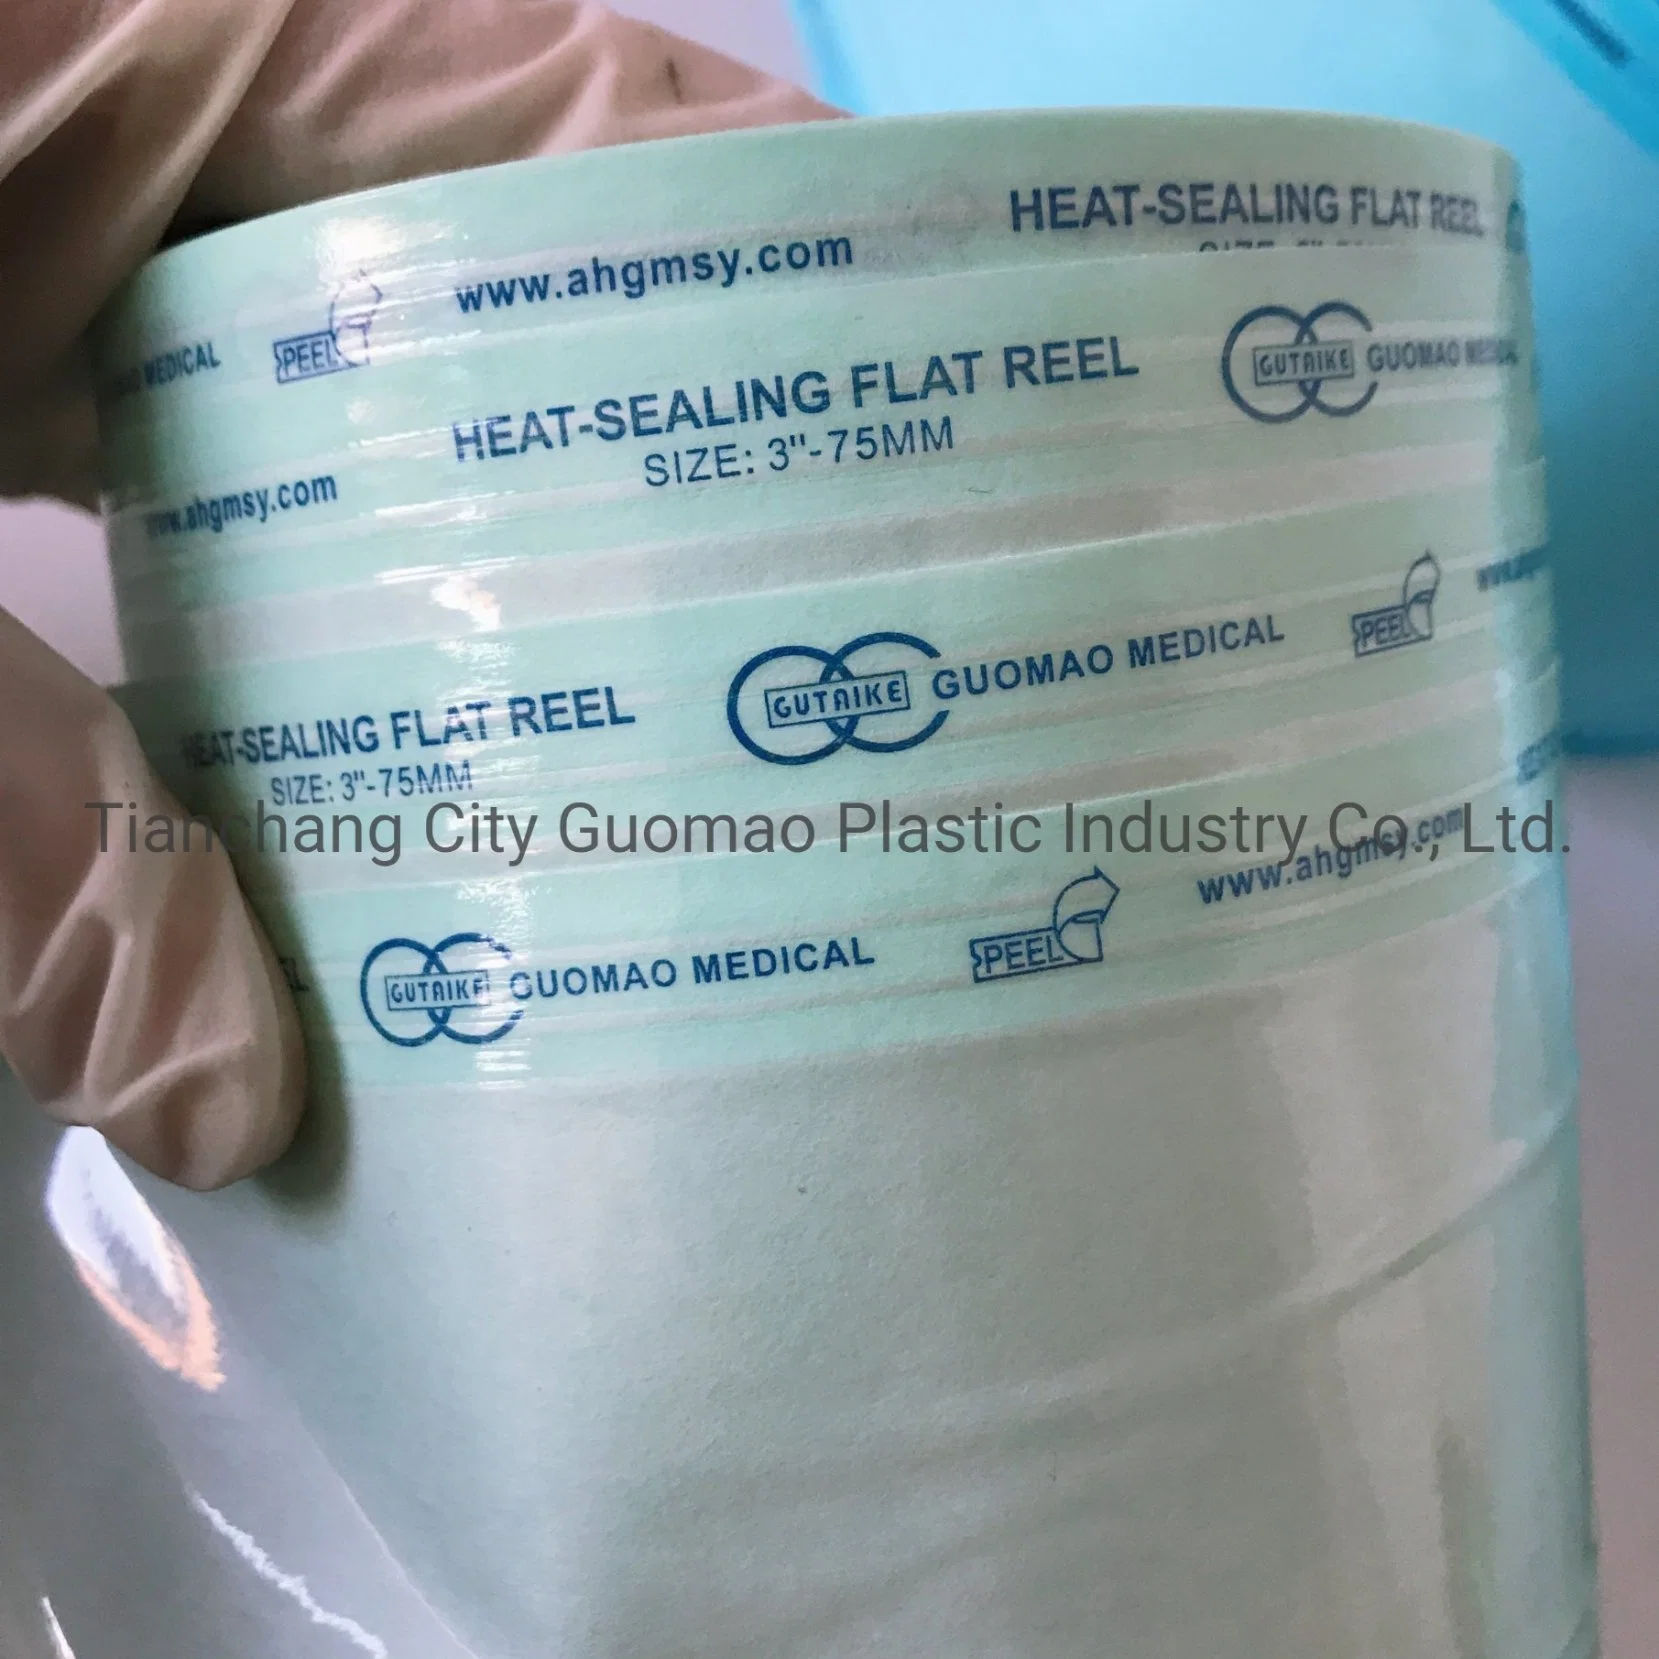 Sterilization Package Flat Reel Bag for Medical Device Package Eo Steam